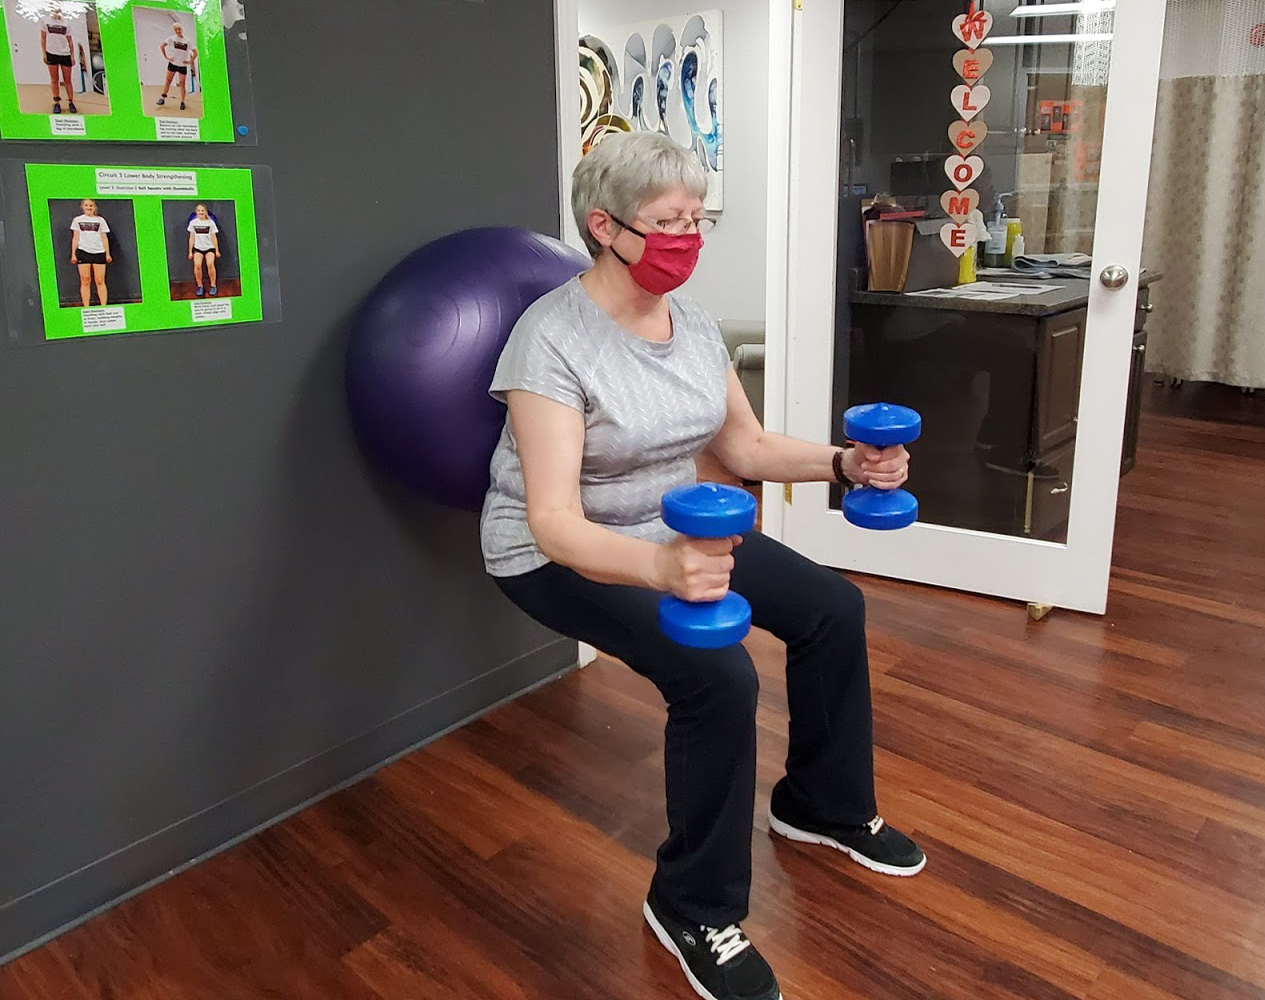 peterborough physiotherapy client exercising holding dumbbell with back against a medicine ball